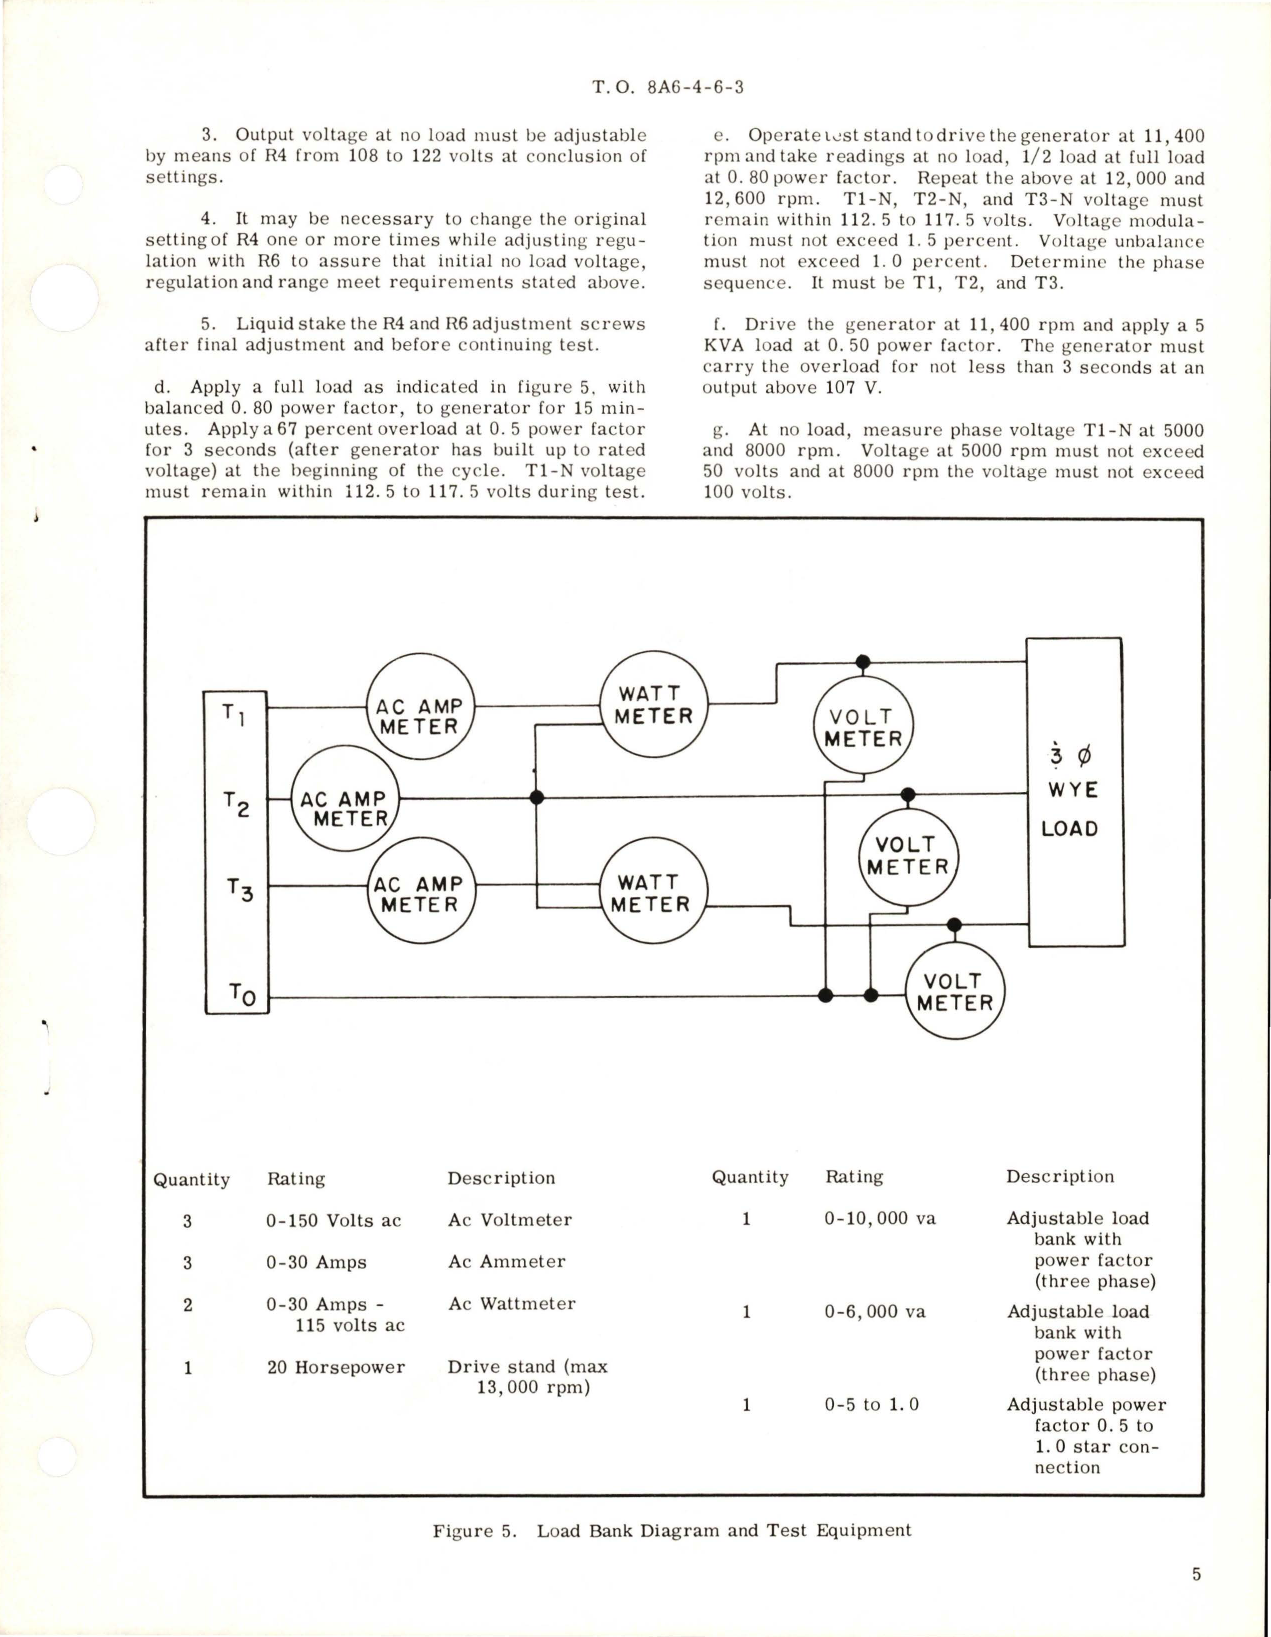 Sample page 5 from AirCorps Library document: Overhaul with Parts Breakdown for Alternating Current Generator - Part AGE59-2